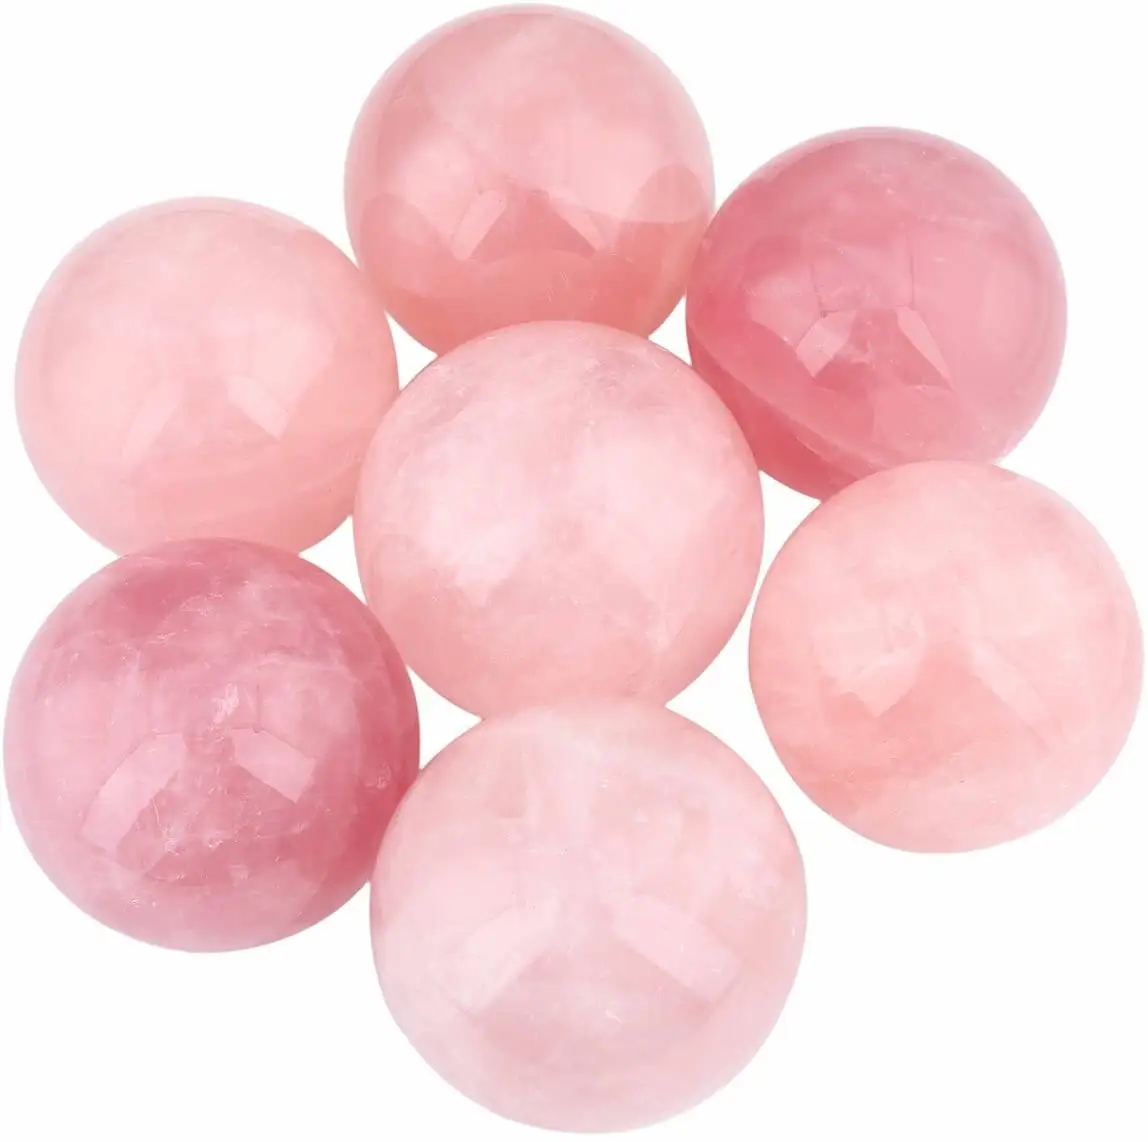 Natural Crystal Sphere Crystals Healing Stones Rose Quartz Ball 40mm With Crystal Stand For Sale